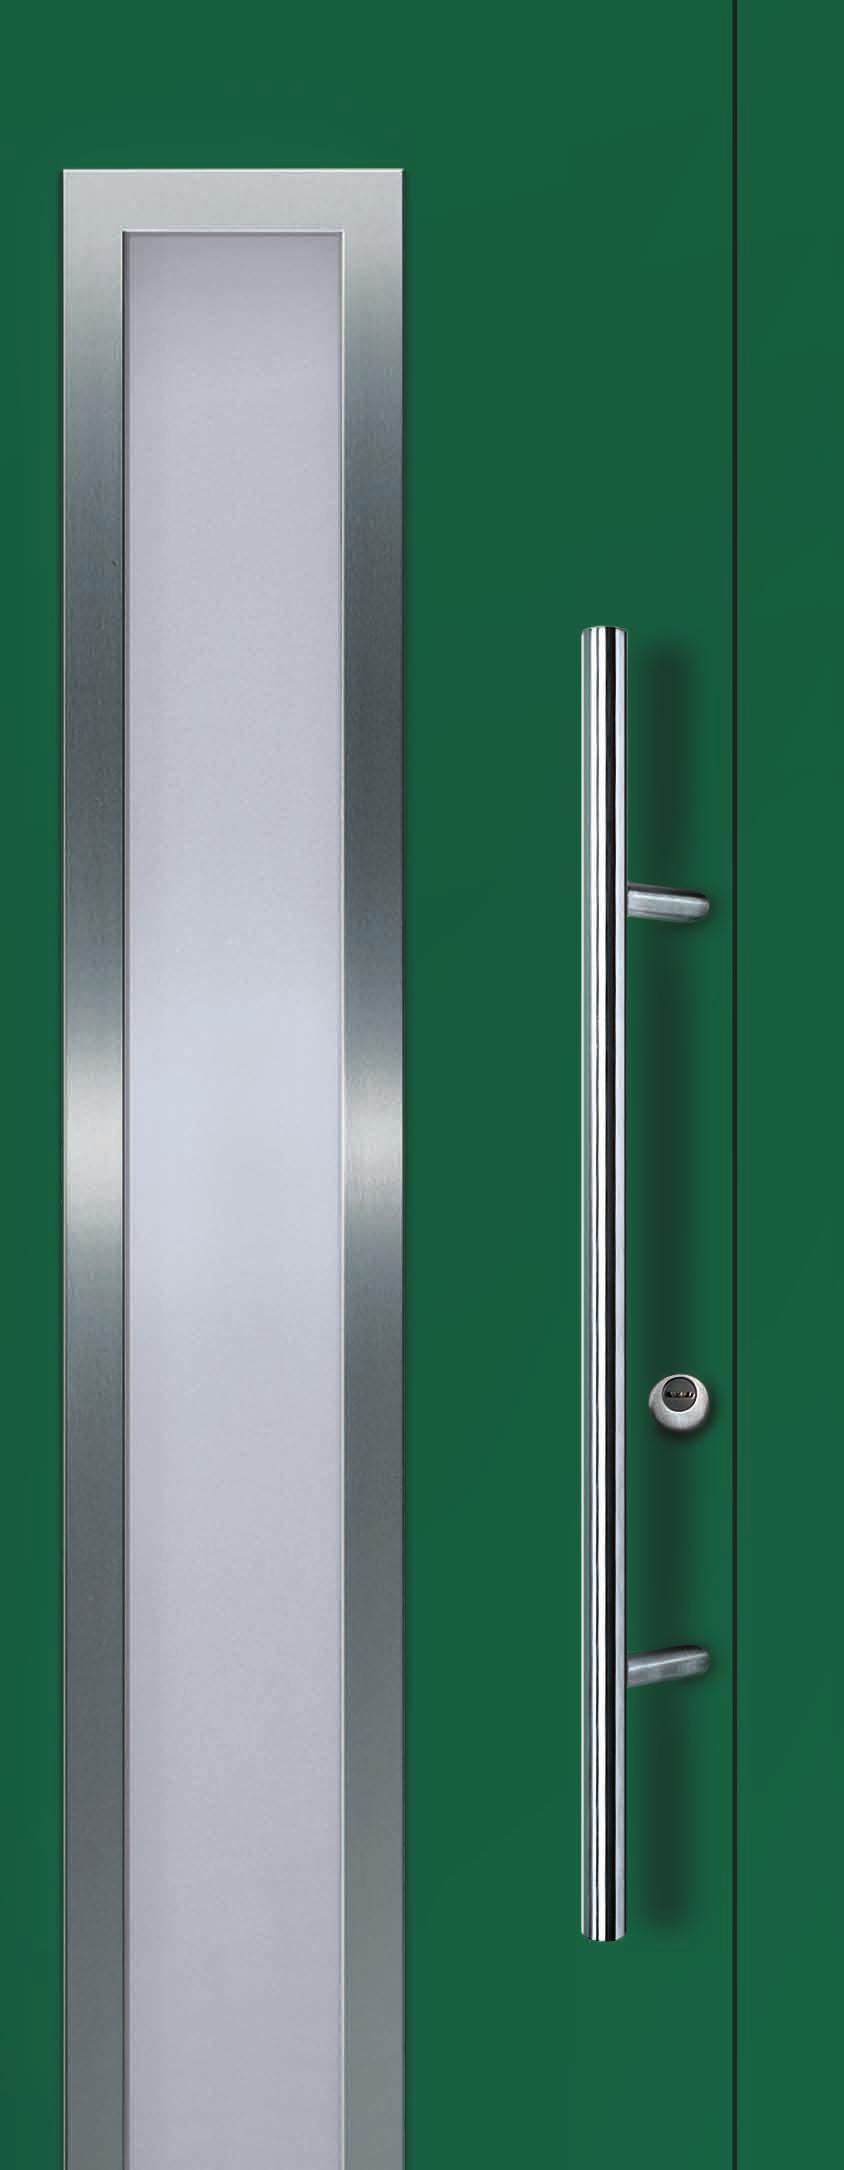 Individualise your door FrontGuard entrance doors are supplied in White RAL 9016 as standard. To meet individual taste, we offer a wide range of RAL colours to choose from.